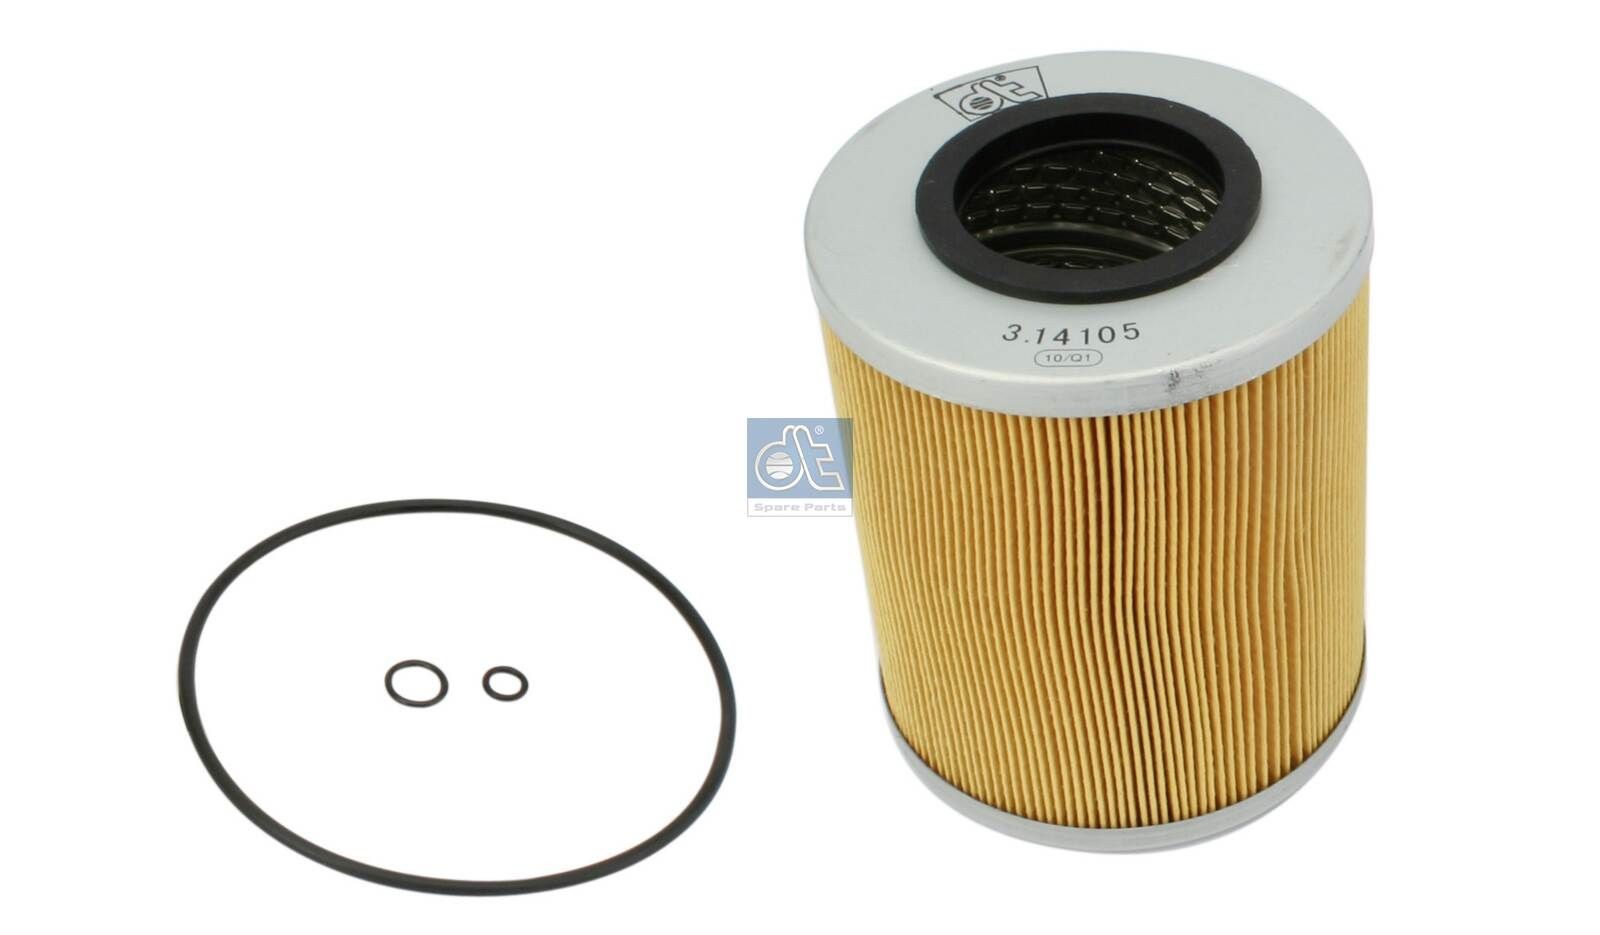 HU 1381 x DT Spare Parts 3.14105 Oil filter 51055040098